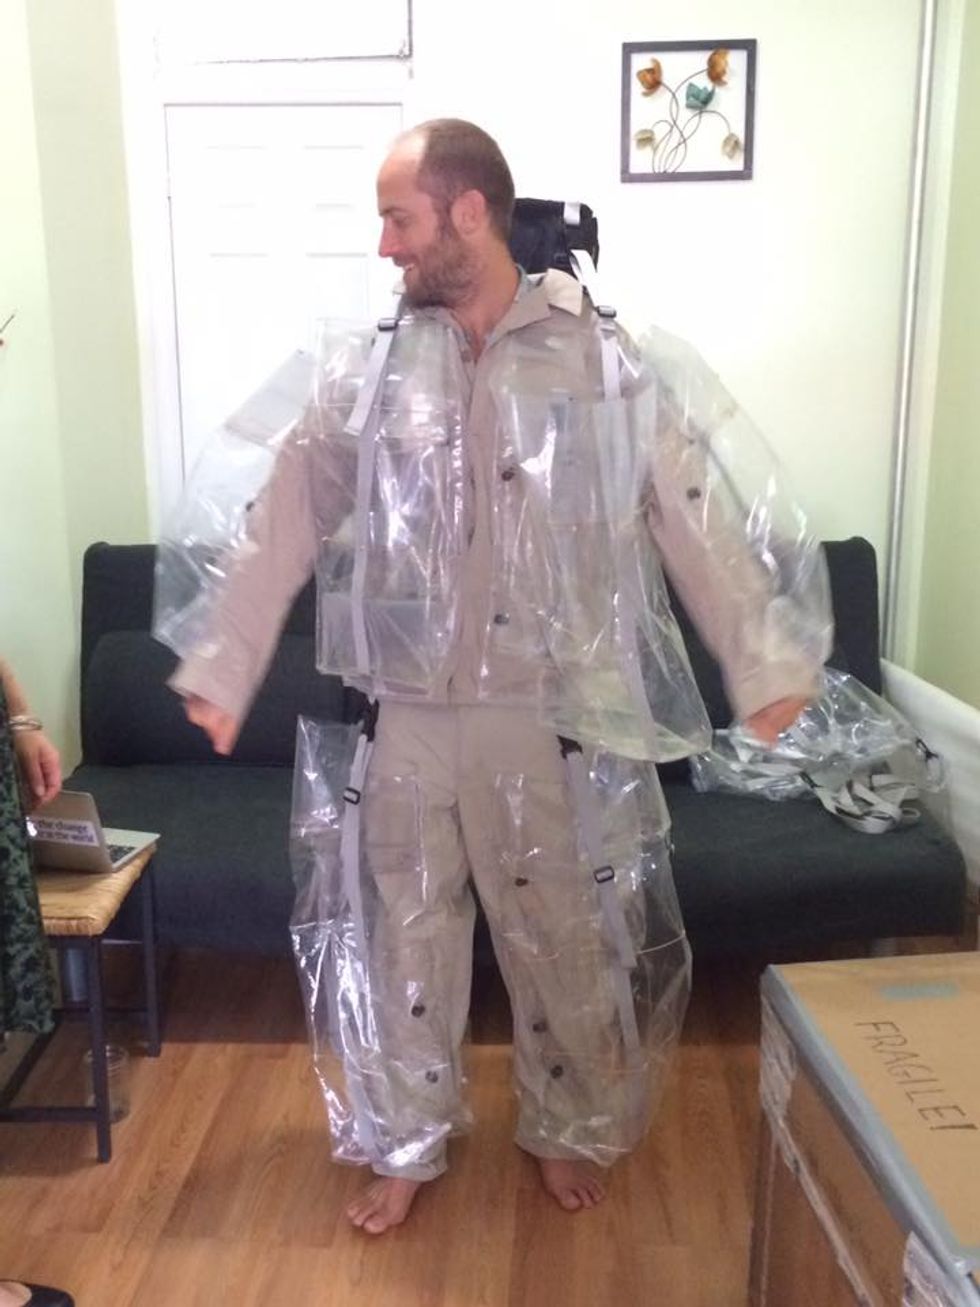 Rob Greenfield tries on his Trash Me suit, made by Recycle Runway's Nancy Judd, for the first time